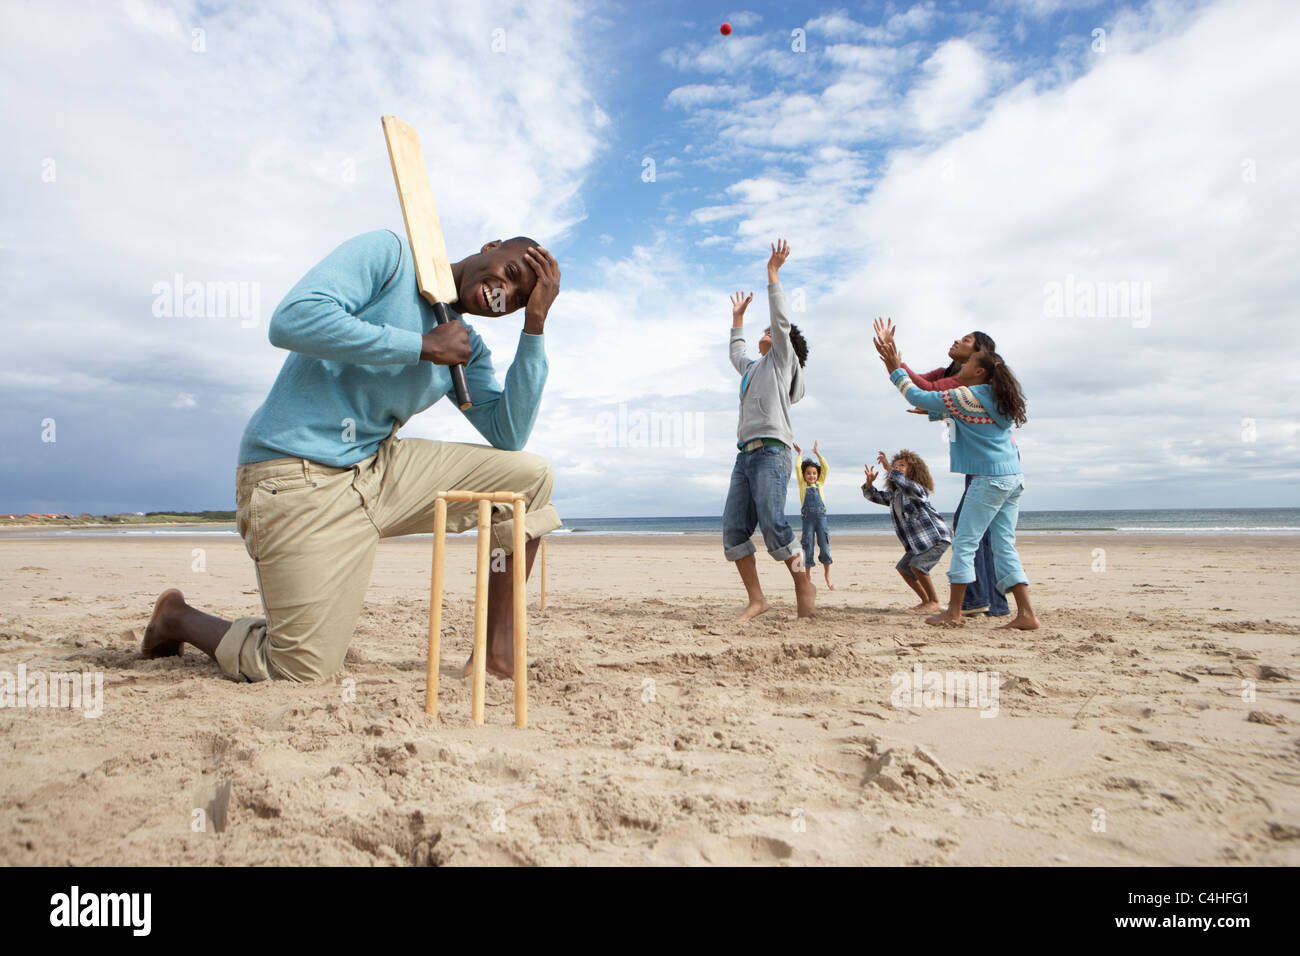 Family playing cricket on beach Stock Photo